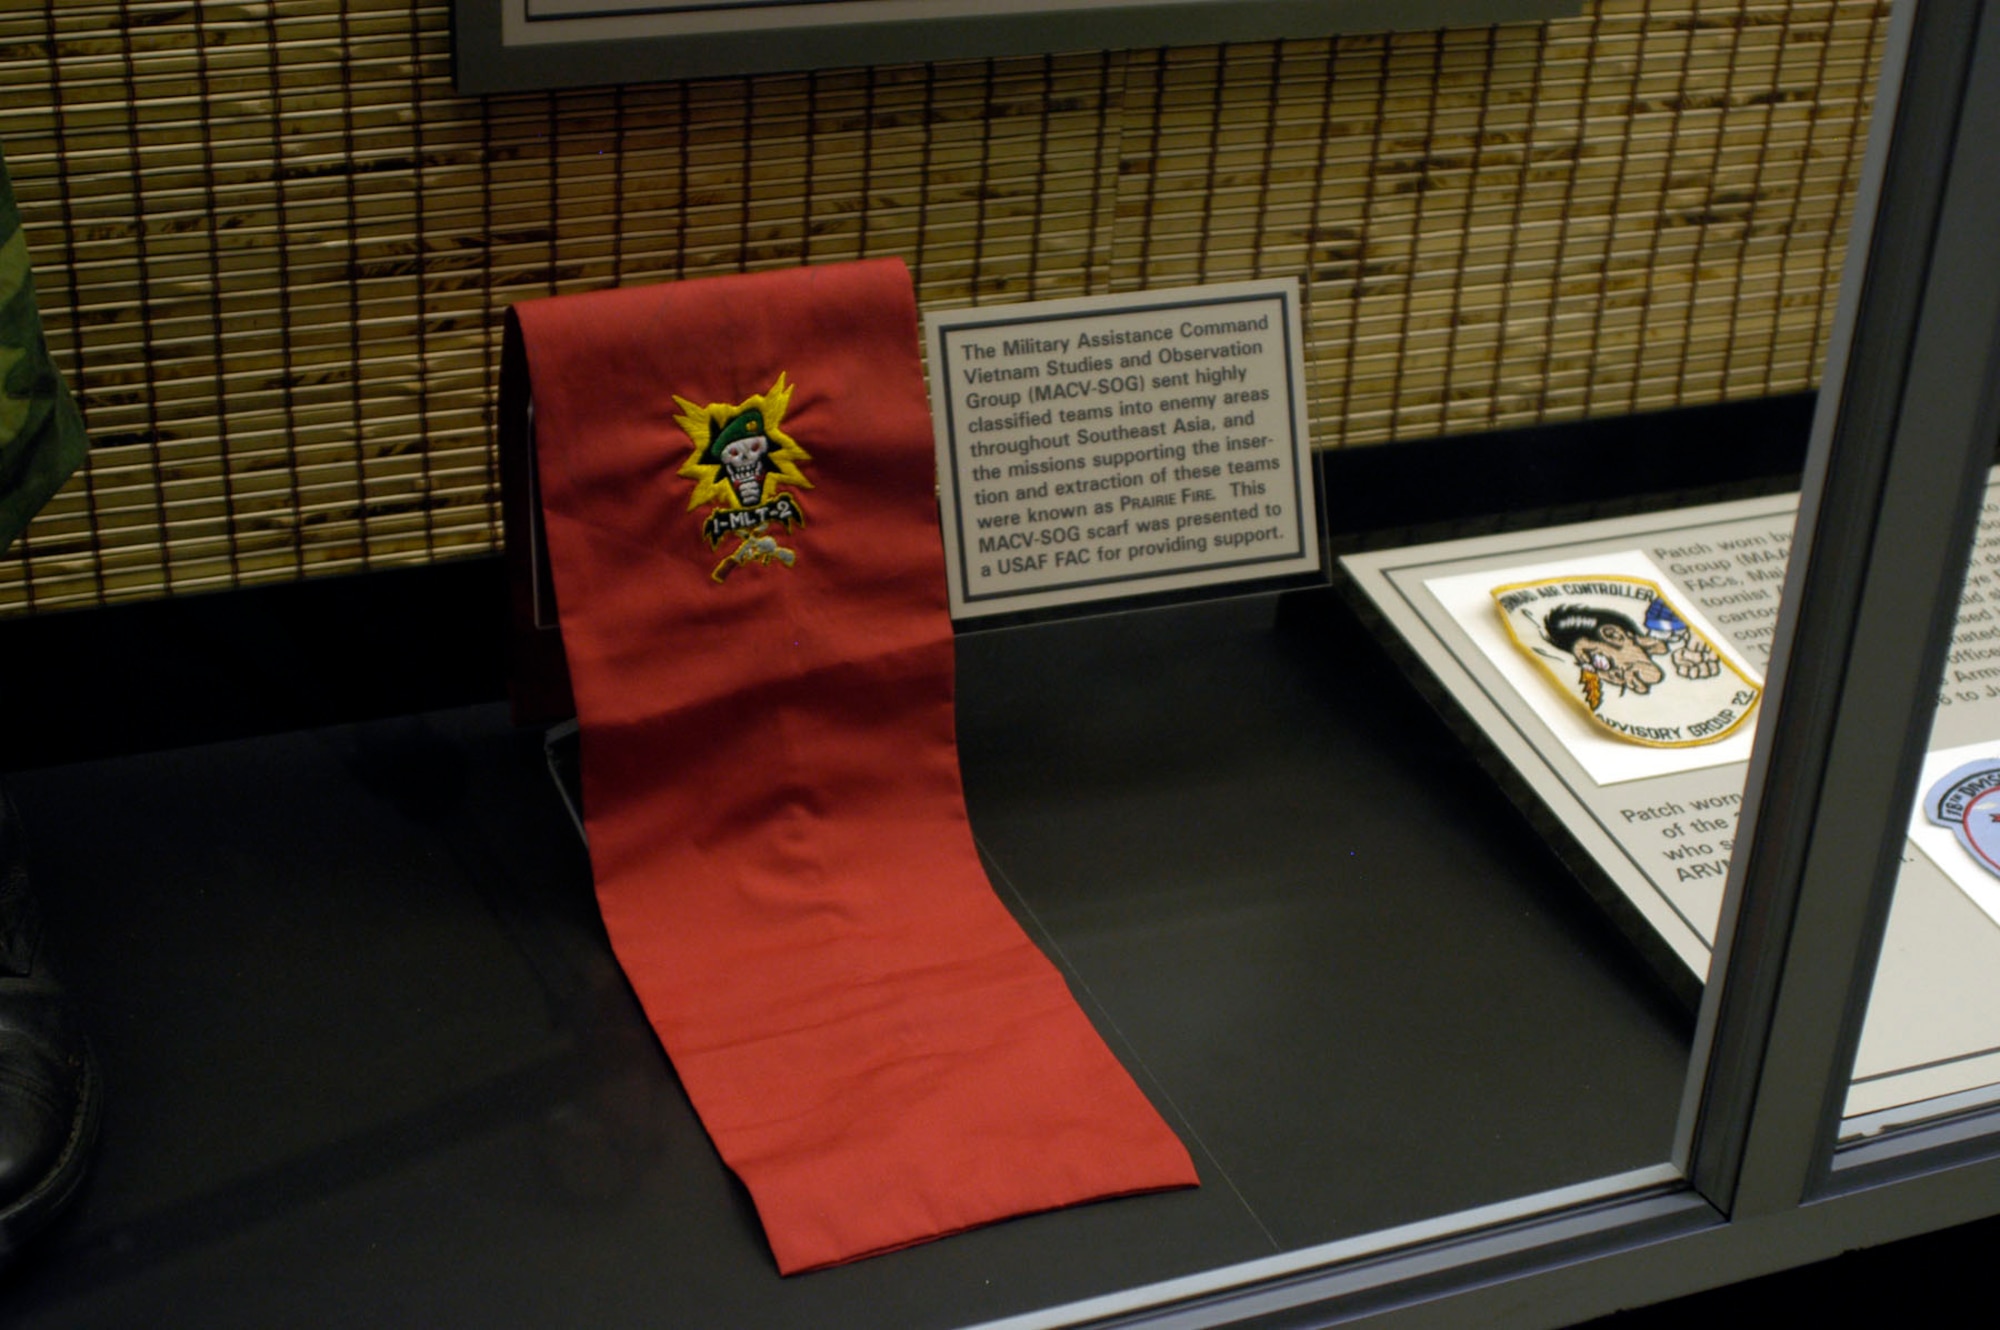 DAYTON, Ohio - The Military Assistance Command Vietnam Studies and Observation Group (MACV-SOG) sent highly classified teams into enemy areas throughout Southeast Asia, and the missions supporting the insertion and extraction of these teams were known as PRAIRIE FIRE. This MACV-SOG scarf was presented to a USAF FAC for providing support. The scarf is on display in the A Dangerous Business: Forward Air Control exhibit in the Southeast Asia War Gallery at the National Museum of the U.S. Air Force. (U.S. Air Force photo)